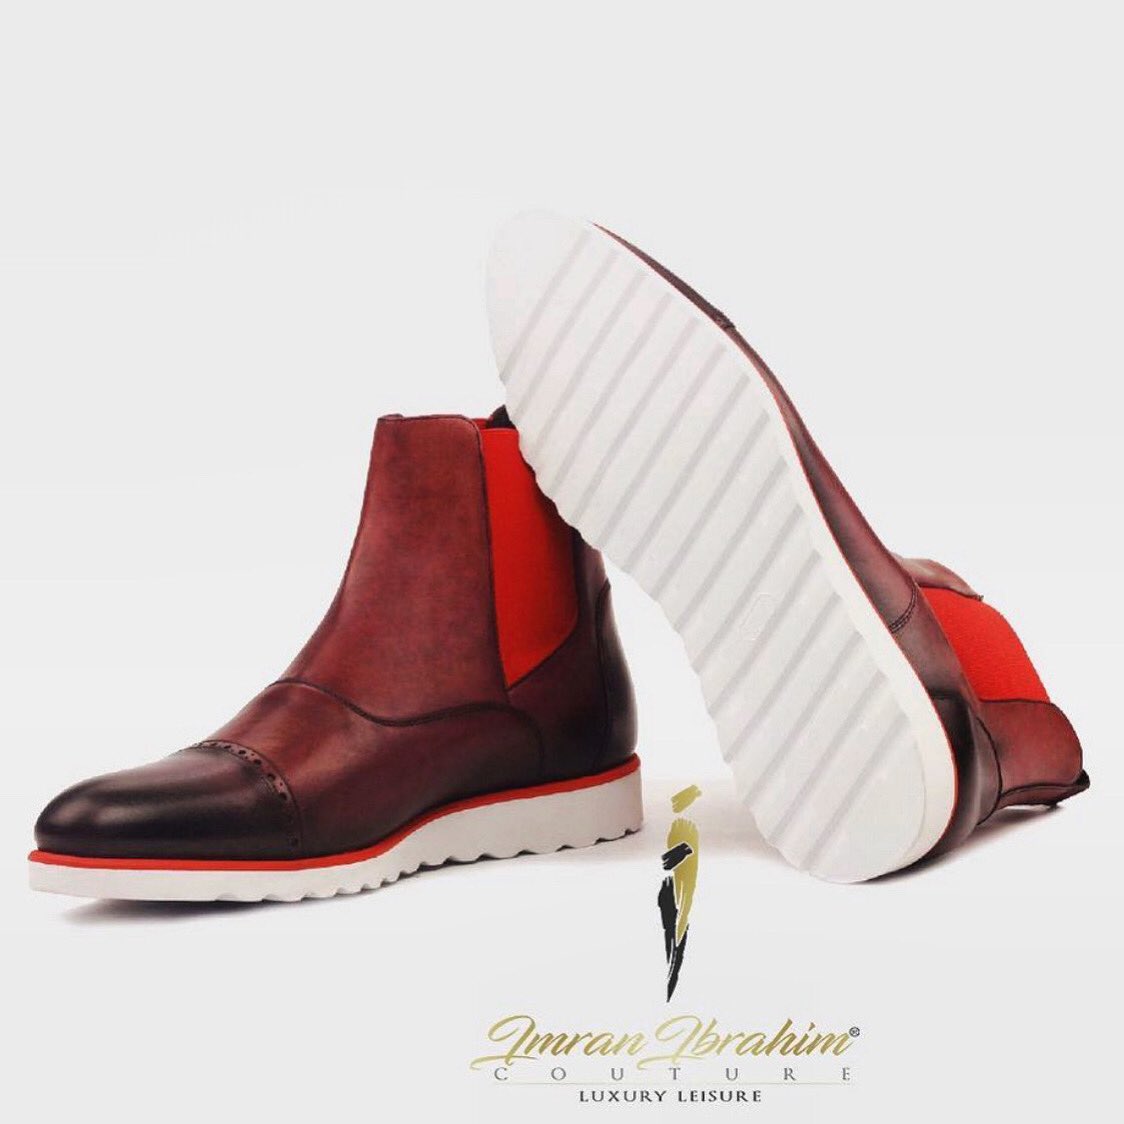 Elevate your wardrobe with our Mahogany Oxblood Chelsea Boots.

#IMRANIBRAHIMCOUTURE

imranibrahimcouture.com/product-page/m…

#london #losangeles #tuesday #blackpoundday #opulencetailoring #boots #shoesaddict #bootaddict #bootsstyle #bootstyle #chelseaboots #chelseabootswomen #chelseabootslover